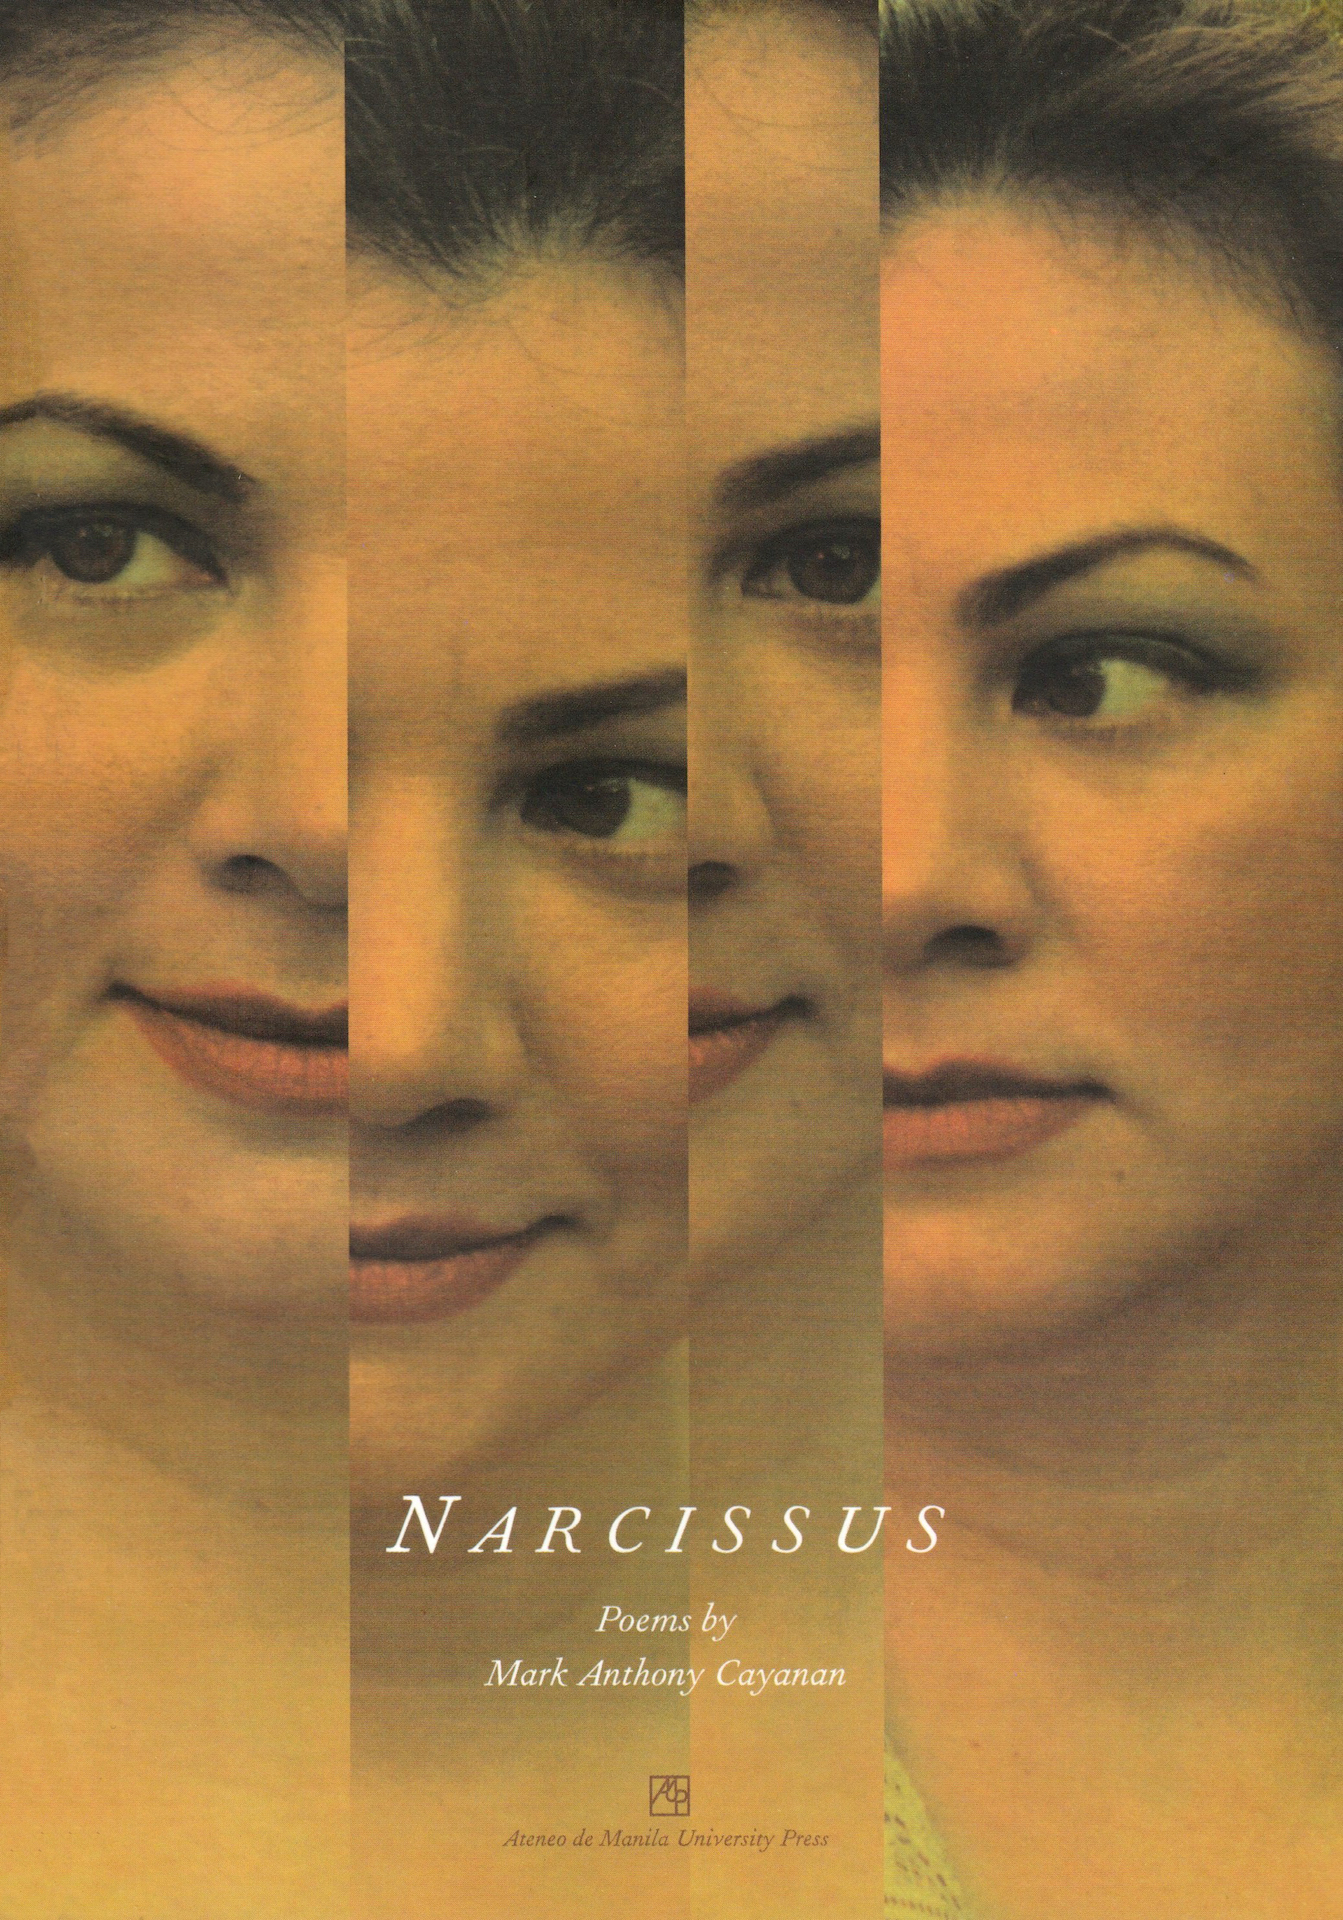 Narcissus poems